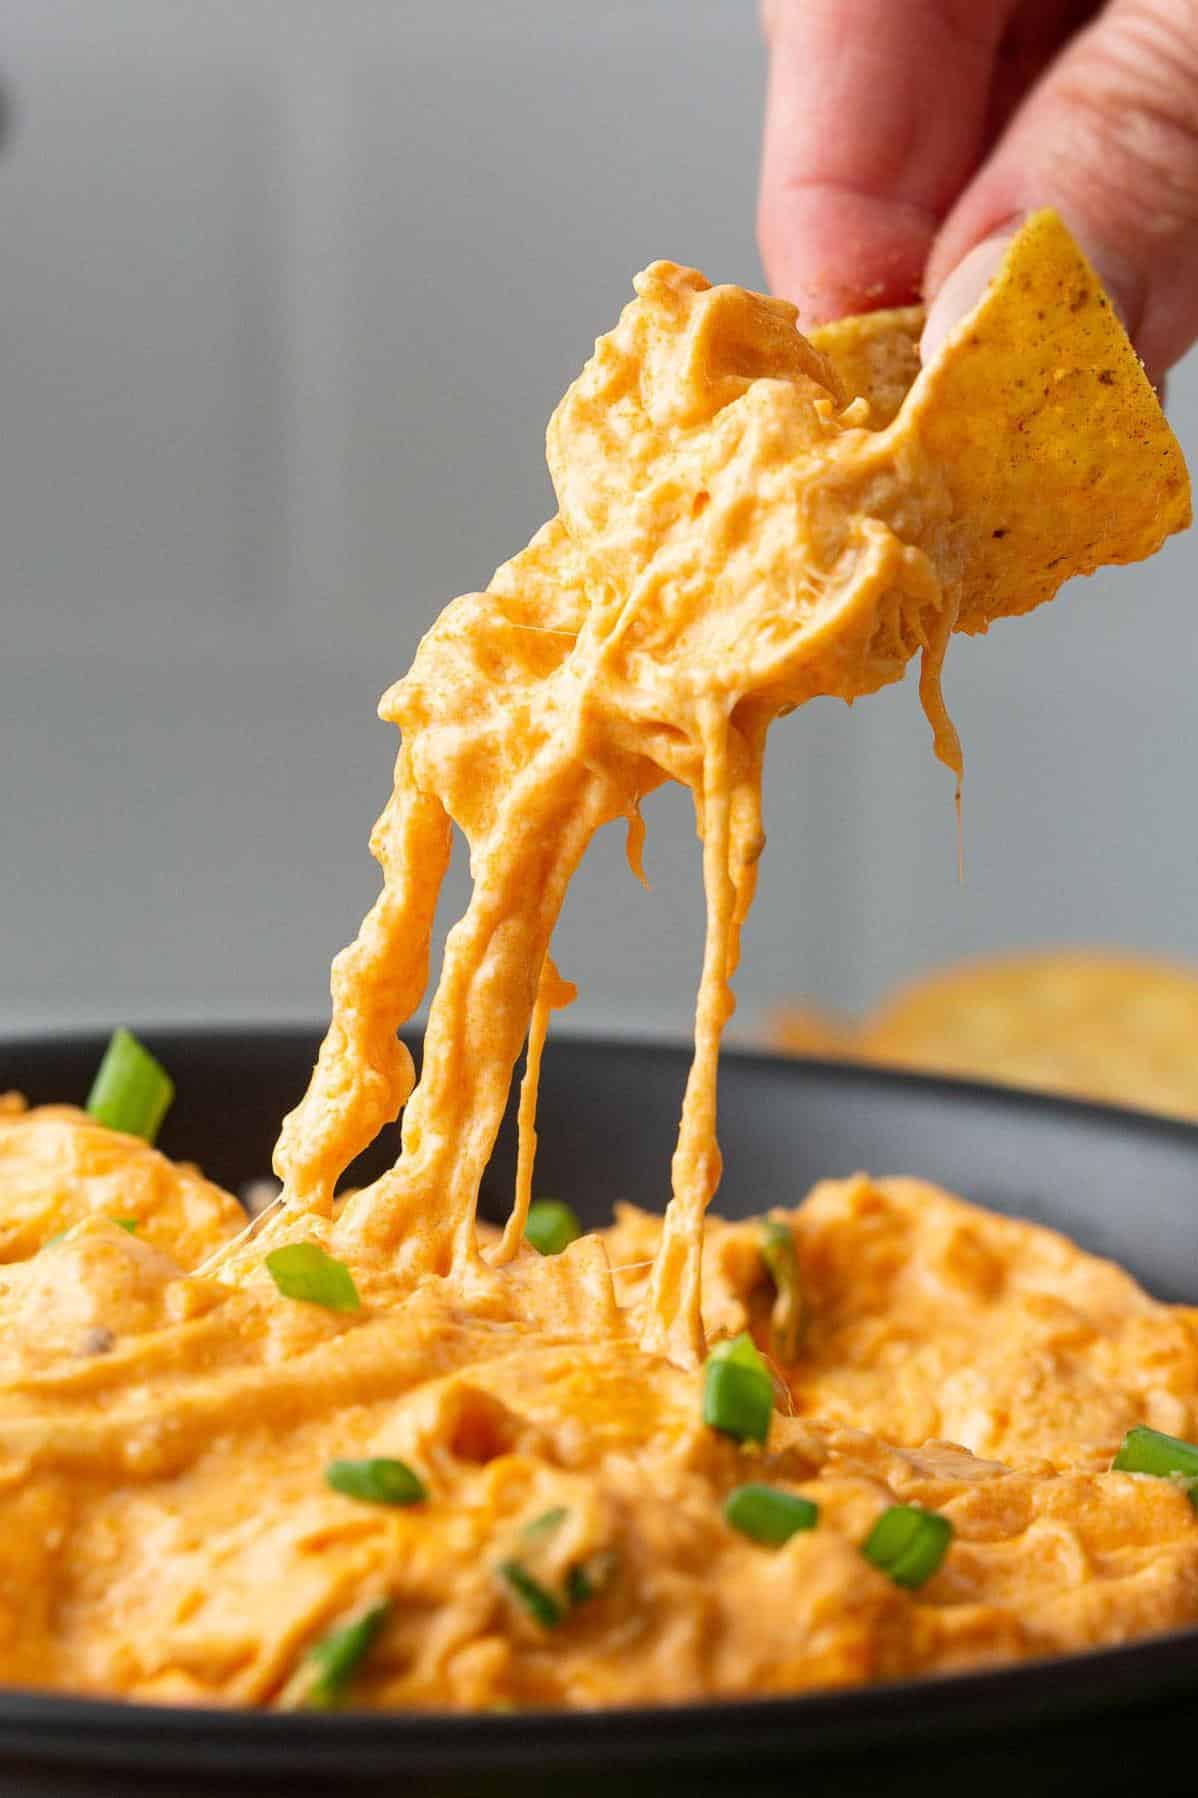  A creamy and spicy dip that will tantalize your taste buds.